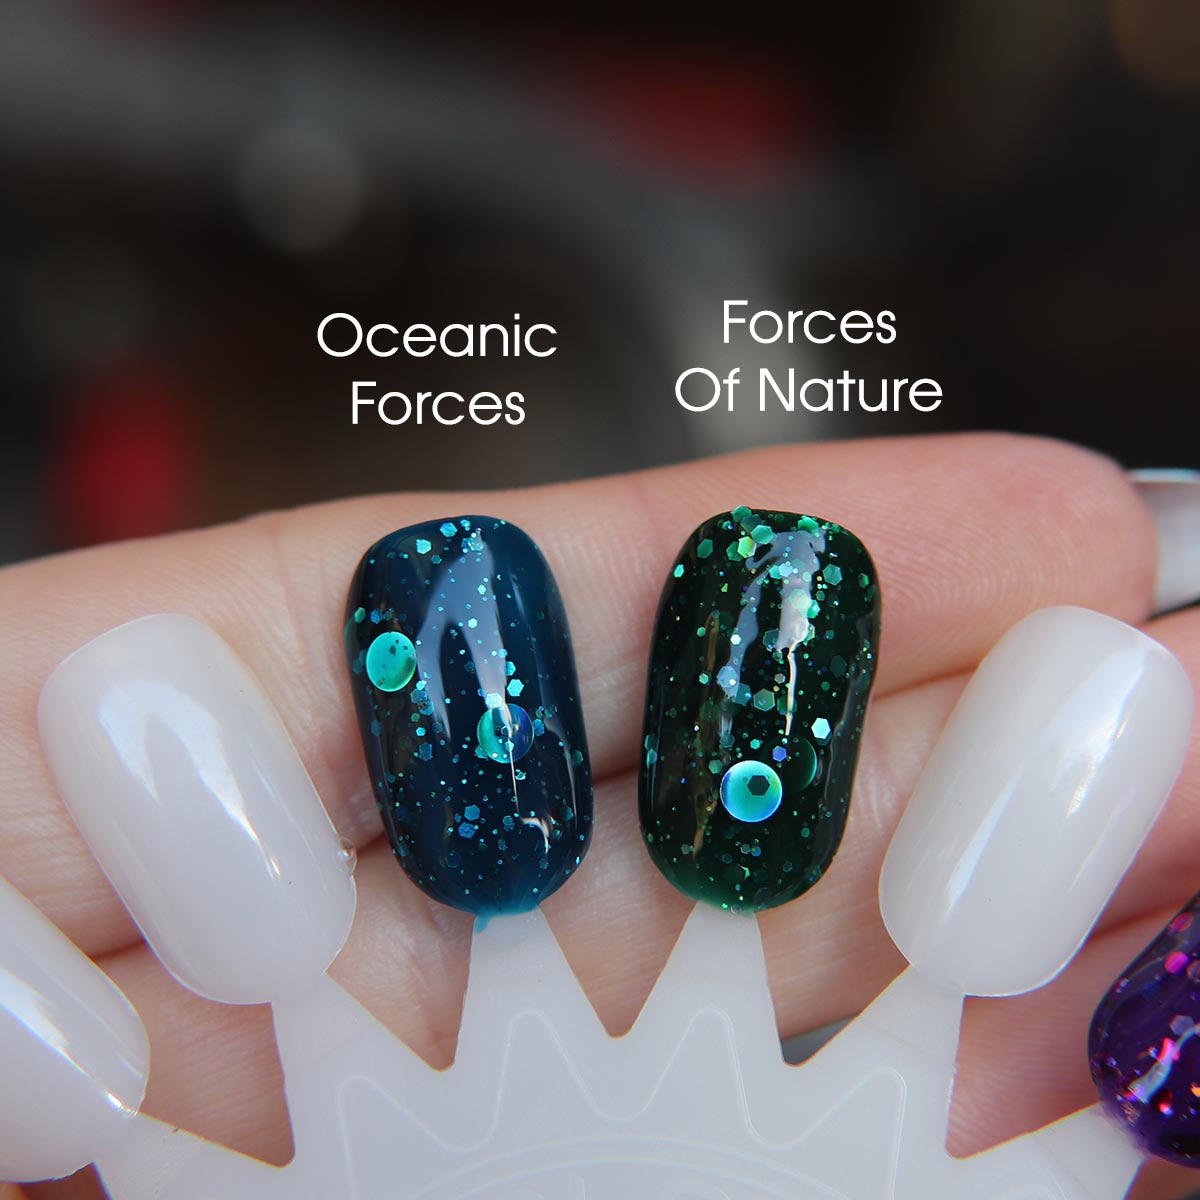 Oceanic Forces